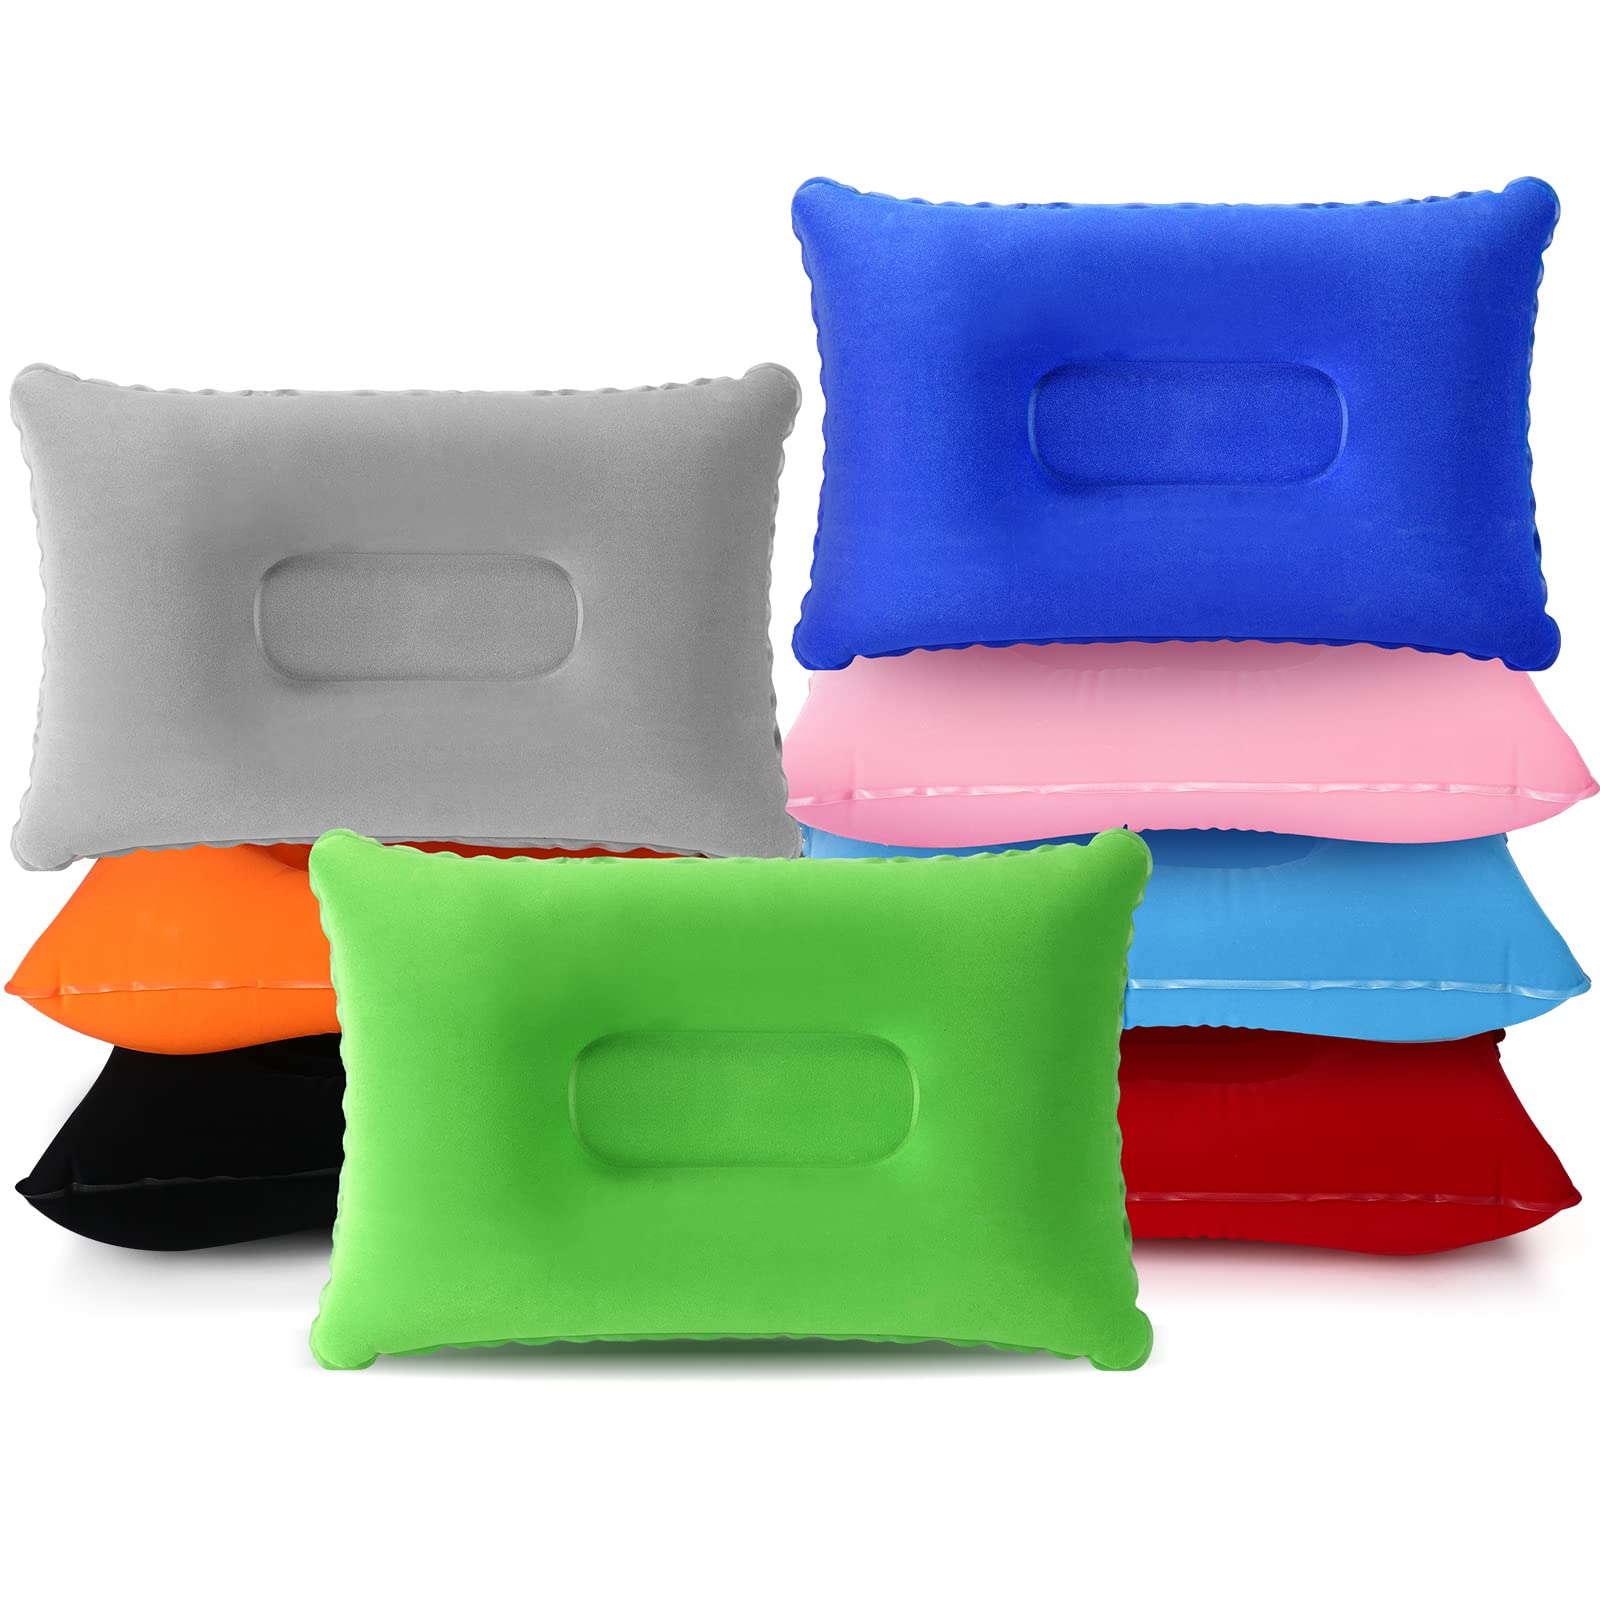 8 Pack Inflatable Camping Pillow Ultralight Travel Pillow Compact